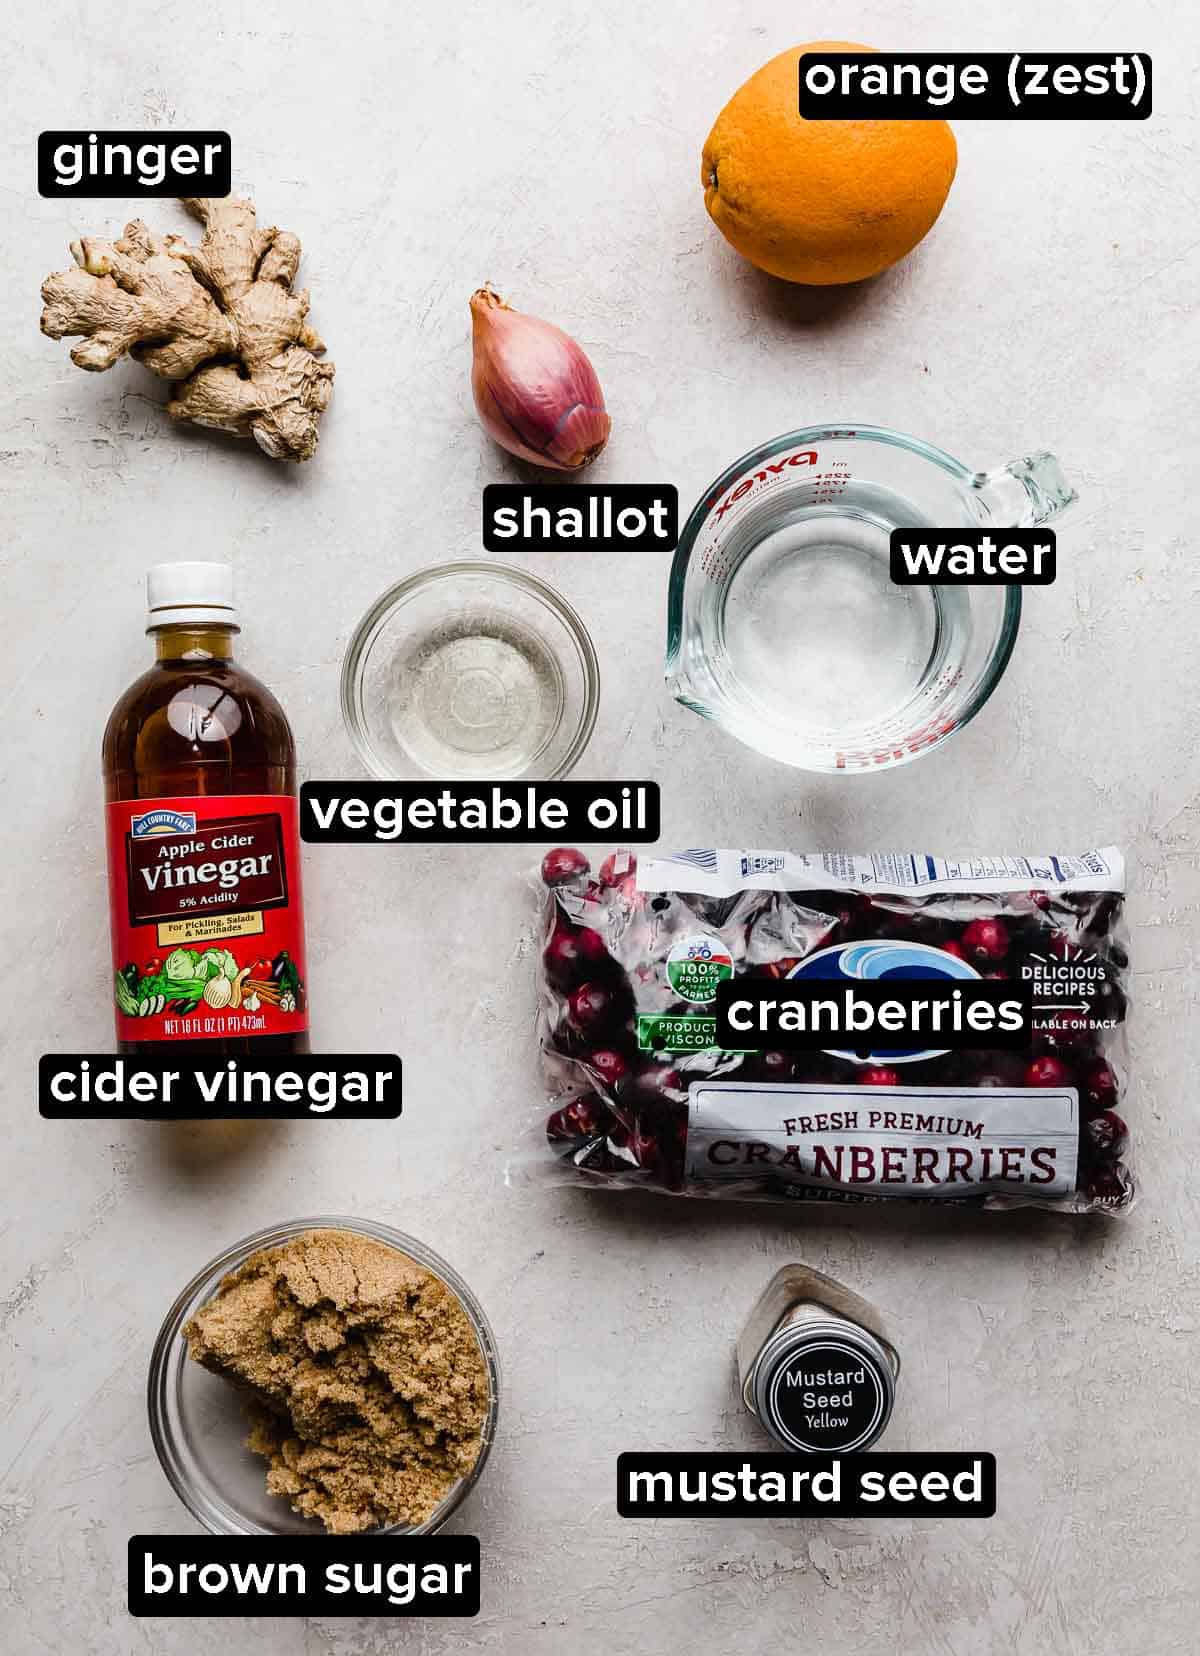 Cranberry chutney ingredients on a light gray background.